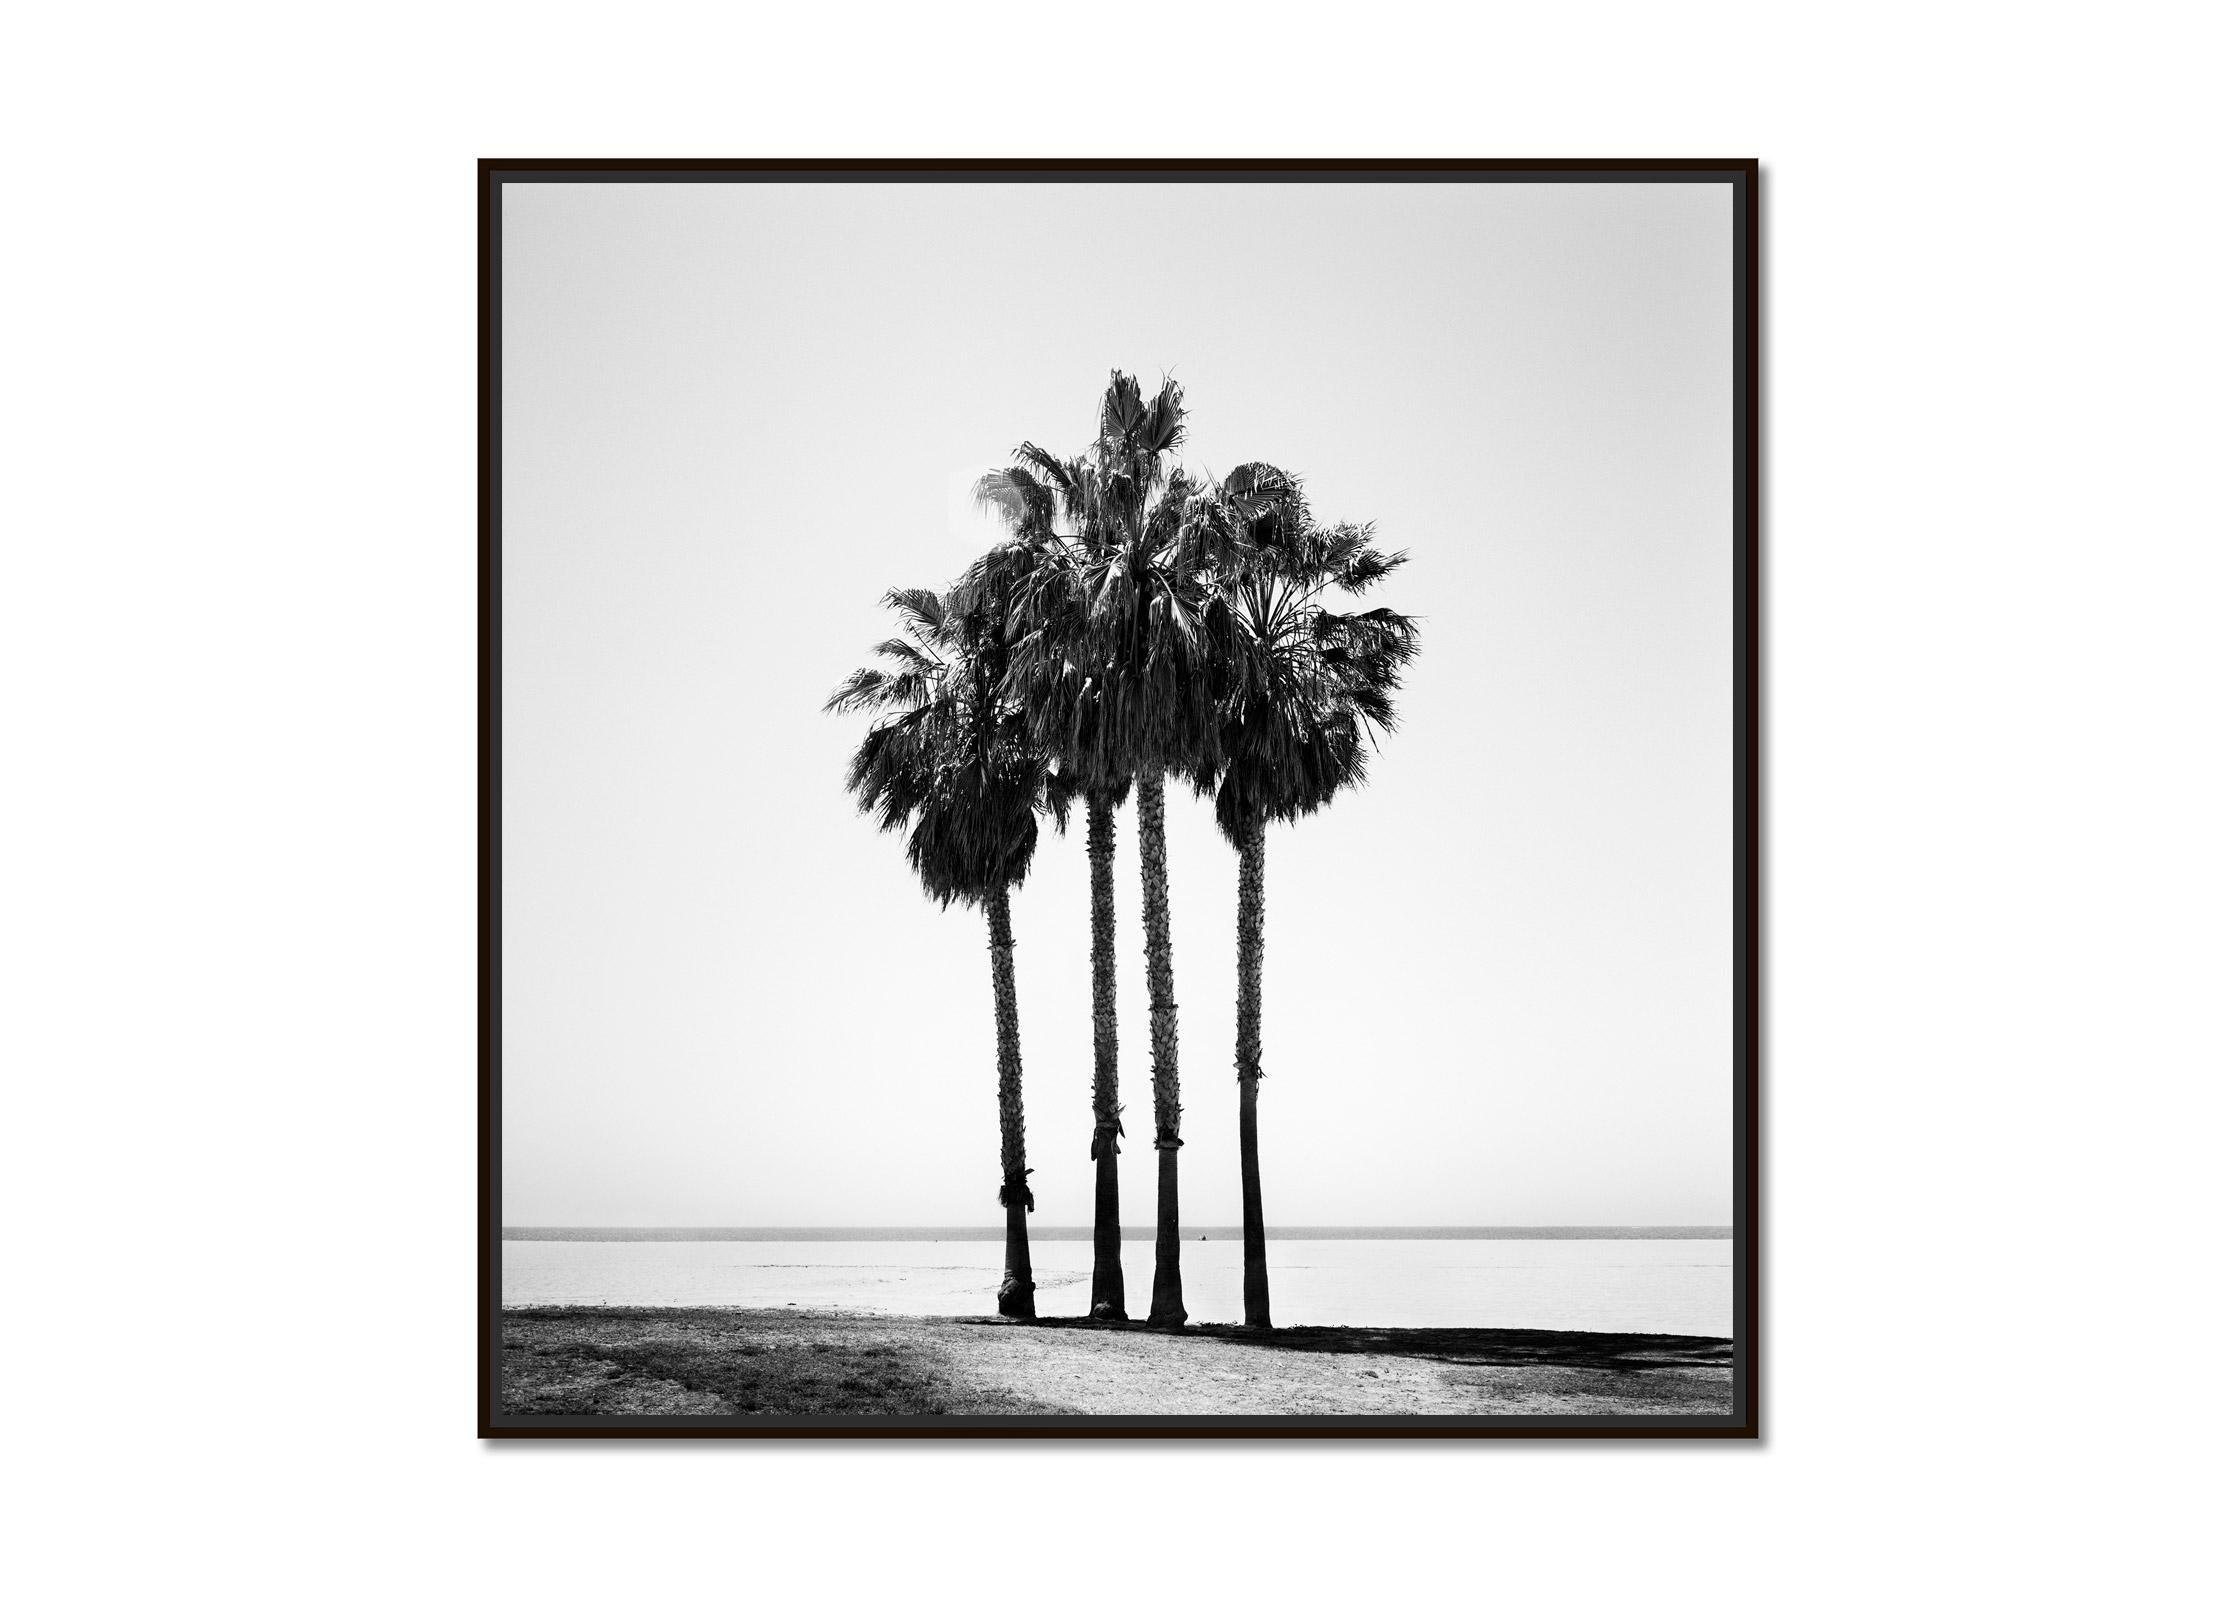 Four Palms, Venice Beach, California, black and white photography, landscape - Photograph by Gerald Berghammer